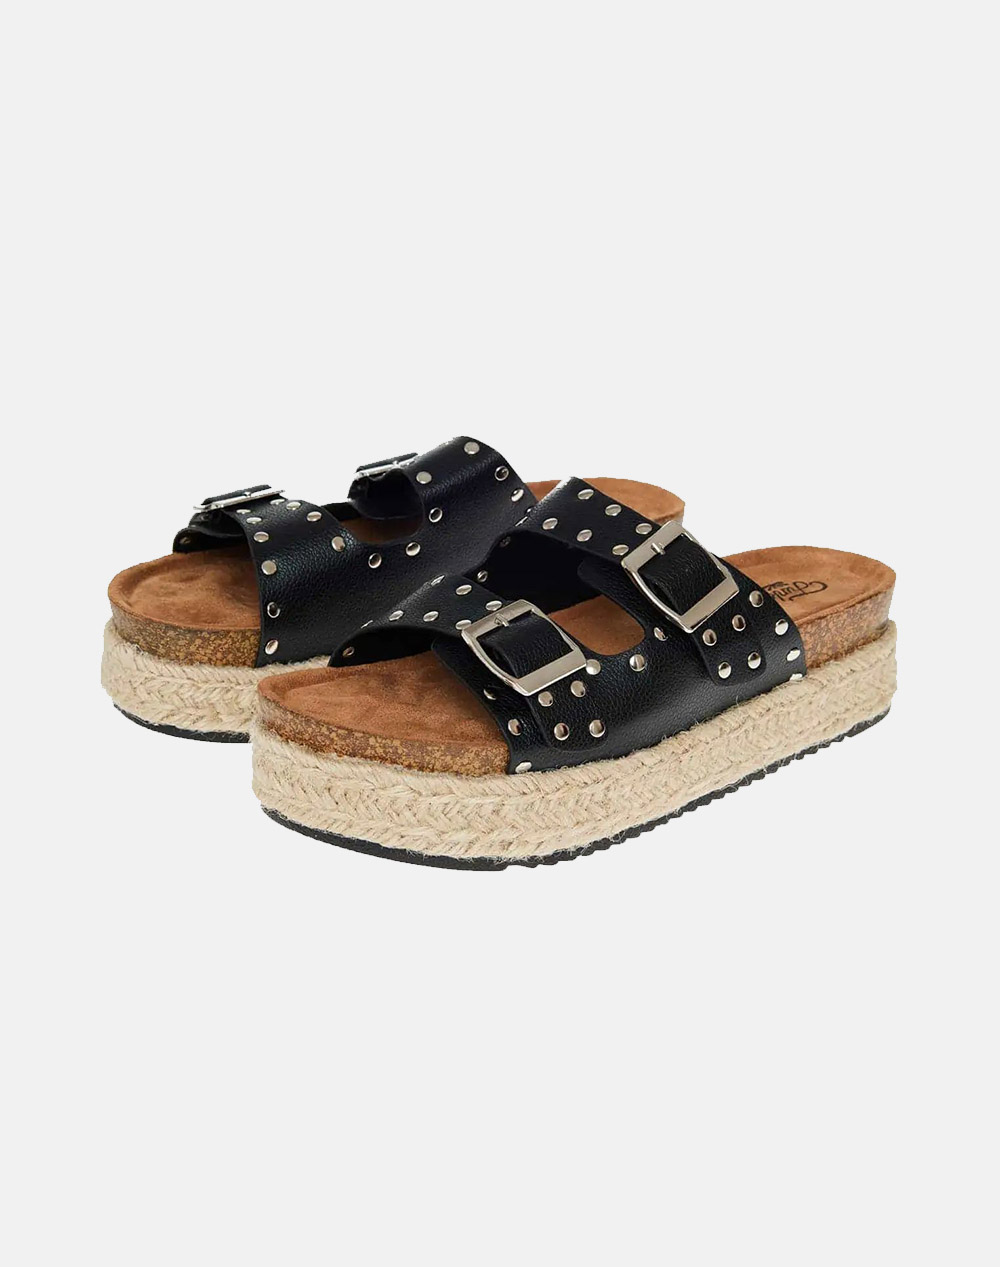 Womens sandals with studs